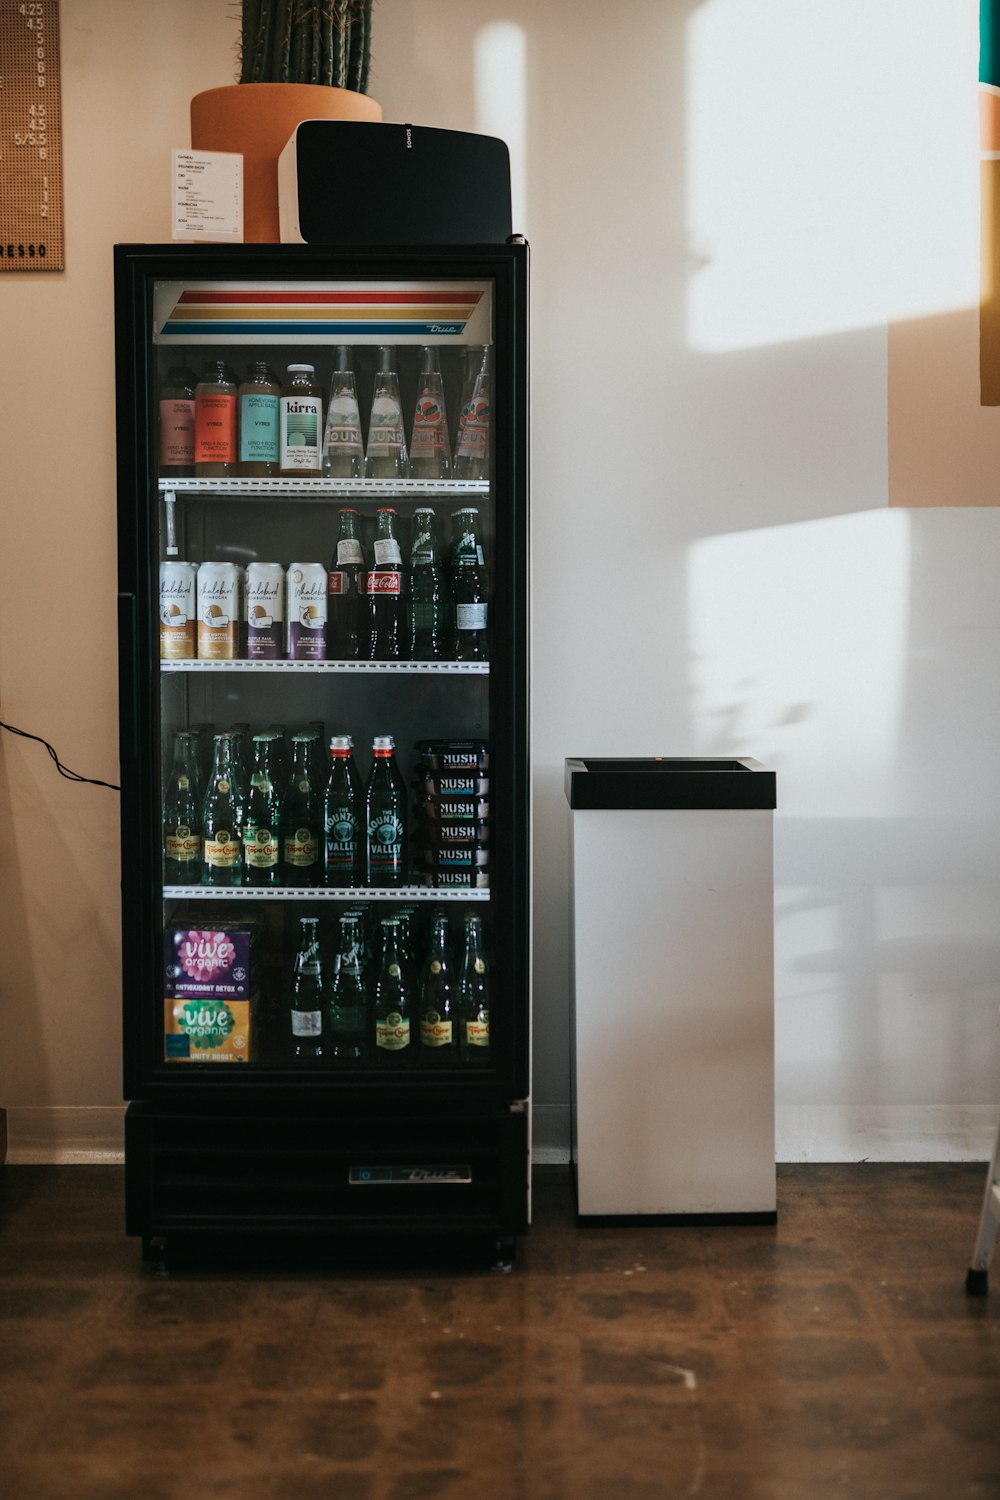 a beverage cooler sitting next to a refrigerator filled with drinks